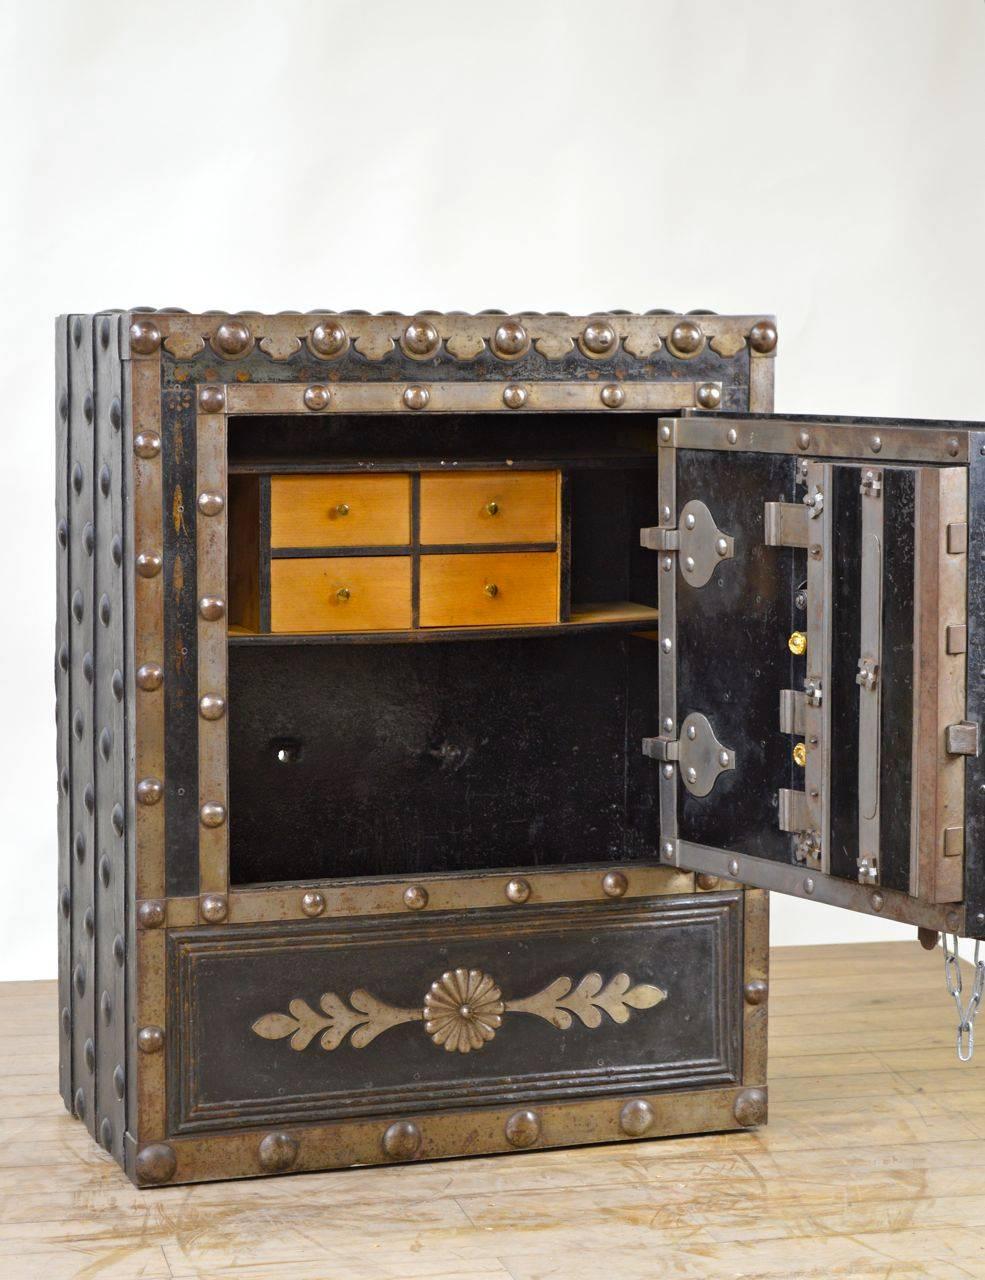 Superb and rare marine iron safe, encased in iron and riveted, lock complications on the front, antique 18th century, probably Italian / Venetian.
It comes with the originals keys and is fully functional. It was purchased in France in 1841